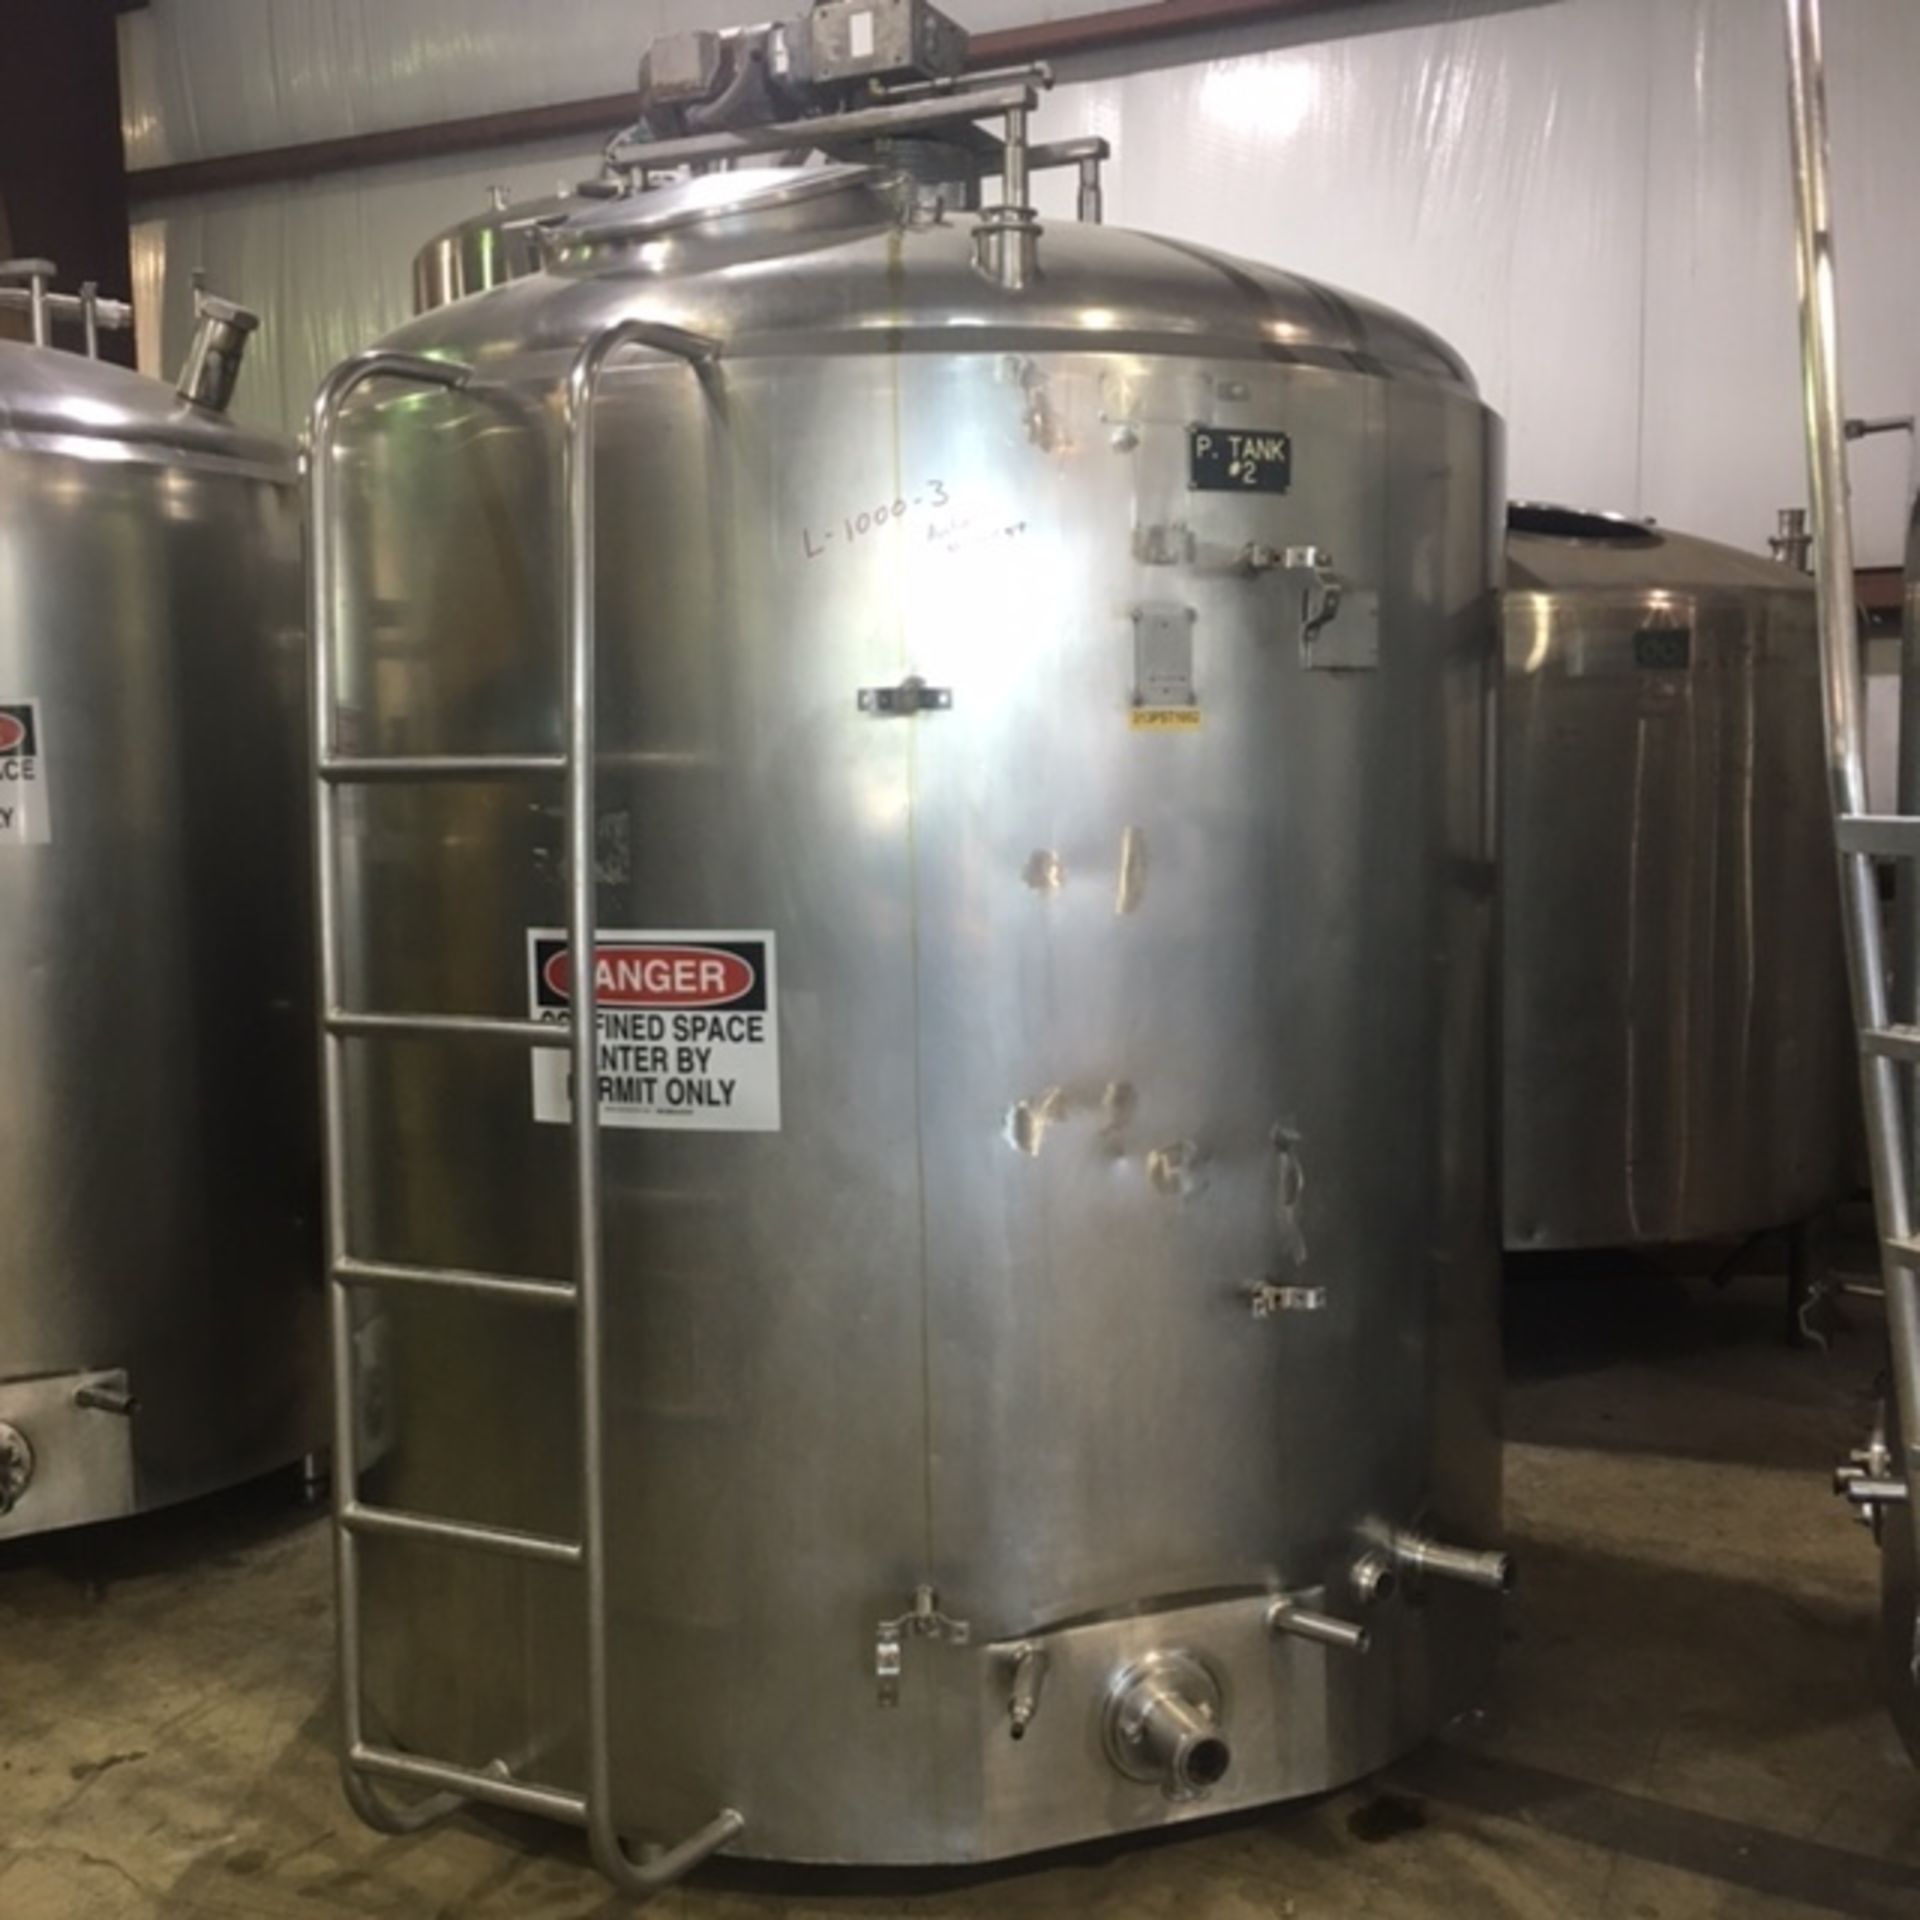 Cherry Burrell 1,000 Gallon Processor, Model MEPDA, S/N 1000-71-1724, Equipped with Vertical